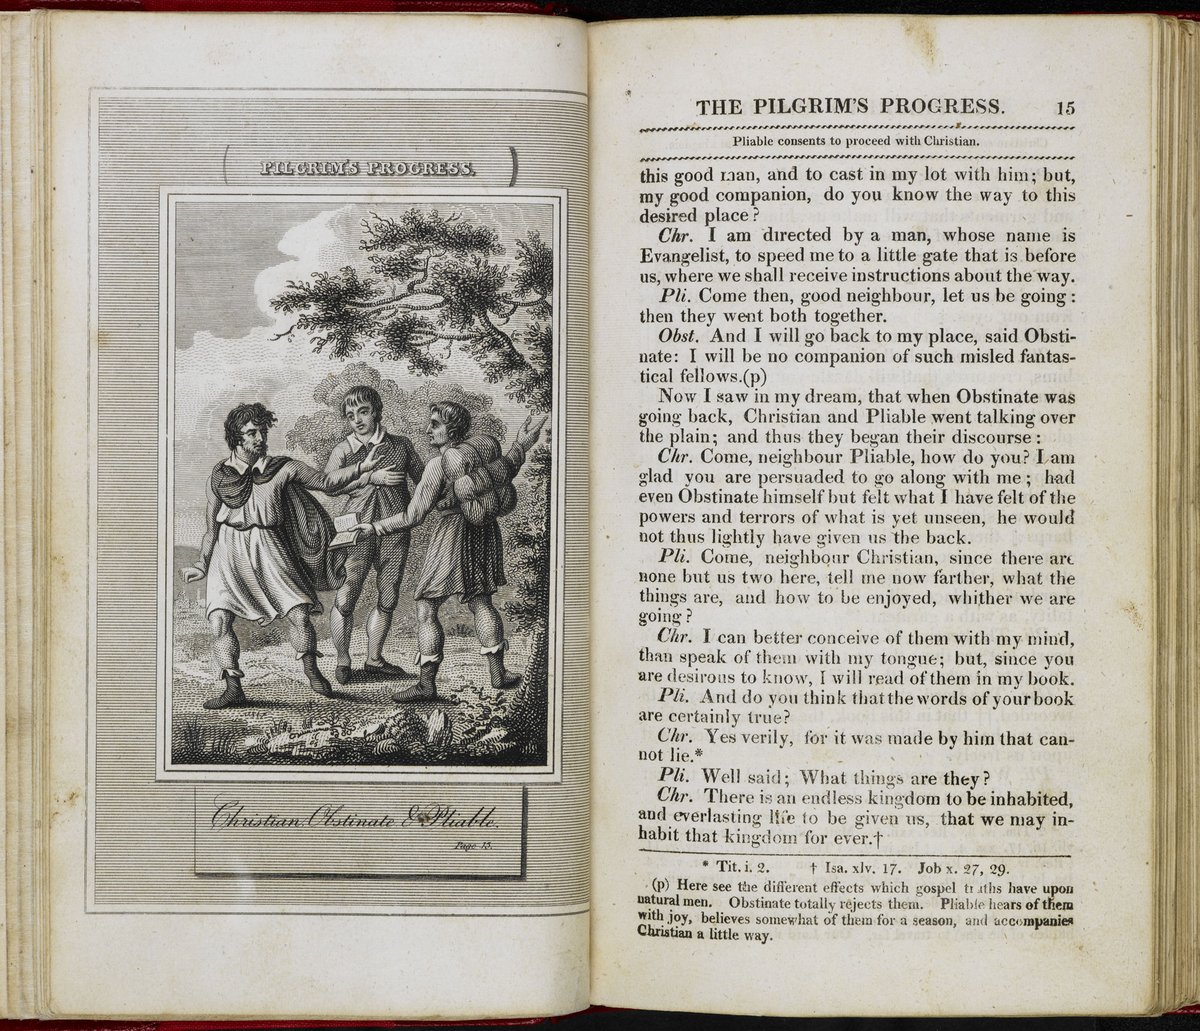 Here is The Pilgrim's Progress itself. Written mostly by John Bunyan while in Bedford Gaol, it tells the story of Christian and his journey from The City of Destruction (representing Earth) to the Celestial City (representing Heaven). https://www.bl.uk/collection-items/the-pilgrims-progress-by-john-bunyan